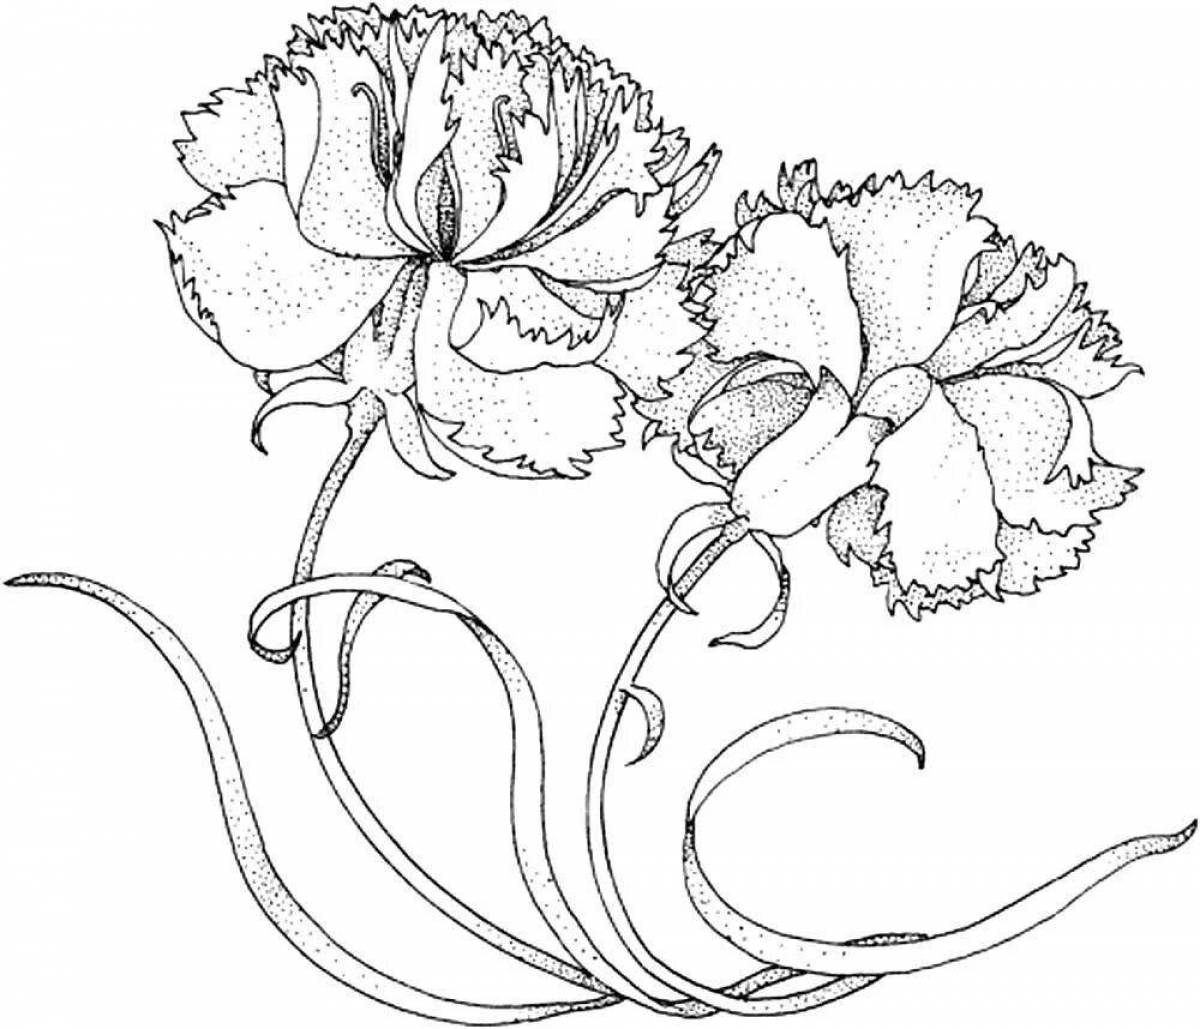 Coloring book dazzling bouquet of carnations